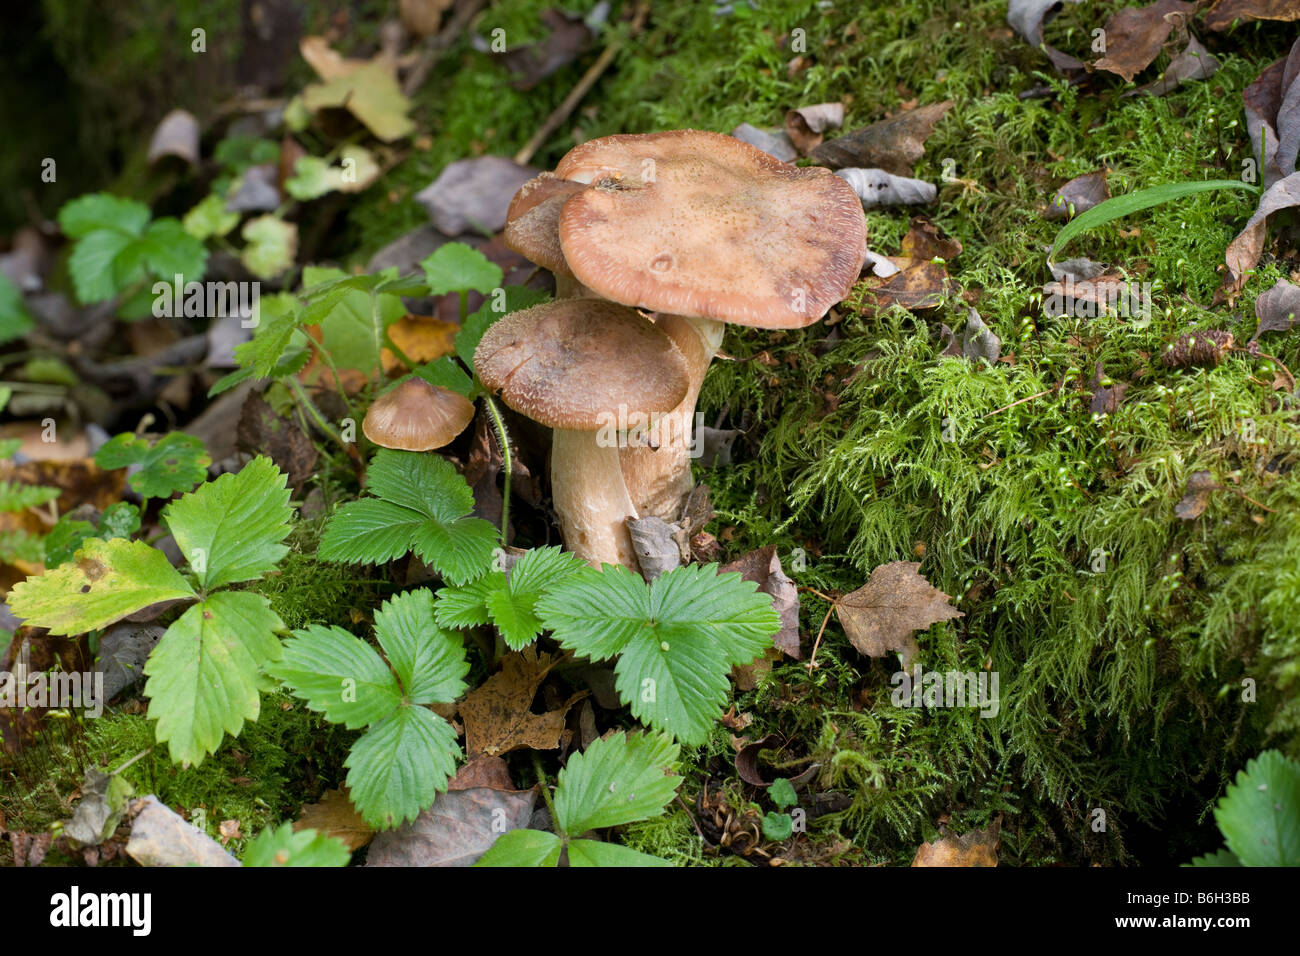 Honey (Bootlace) Fungi Armillaria mellea fruiting bodies growing on a dead mossy tree stump Stock Photo